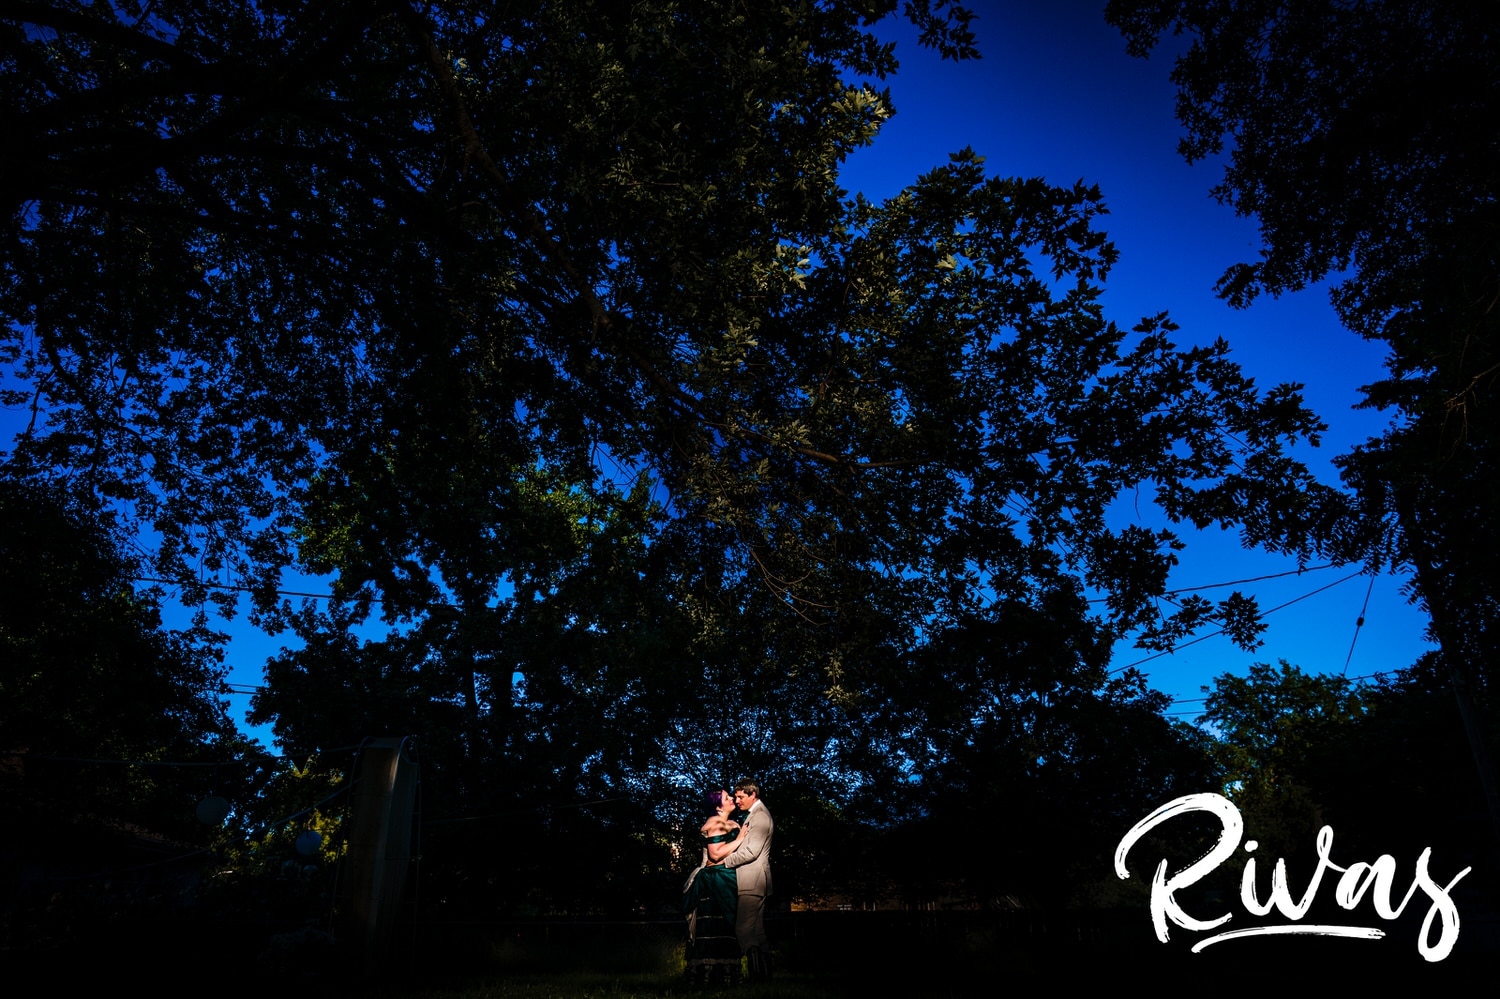 A vibrant, candid picture of a bride and groom dancing in a spot of sunlight underneath a canopy of green trees during their intimate backyard summer wedding reception. 